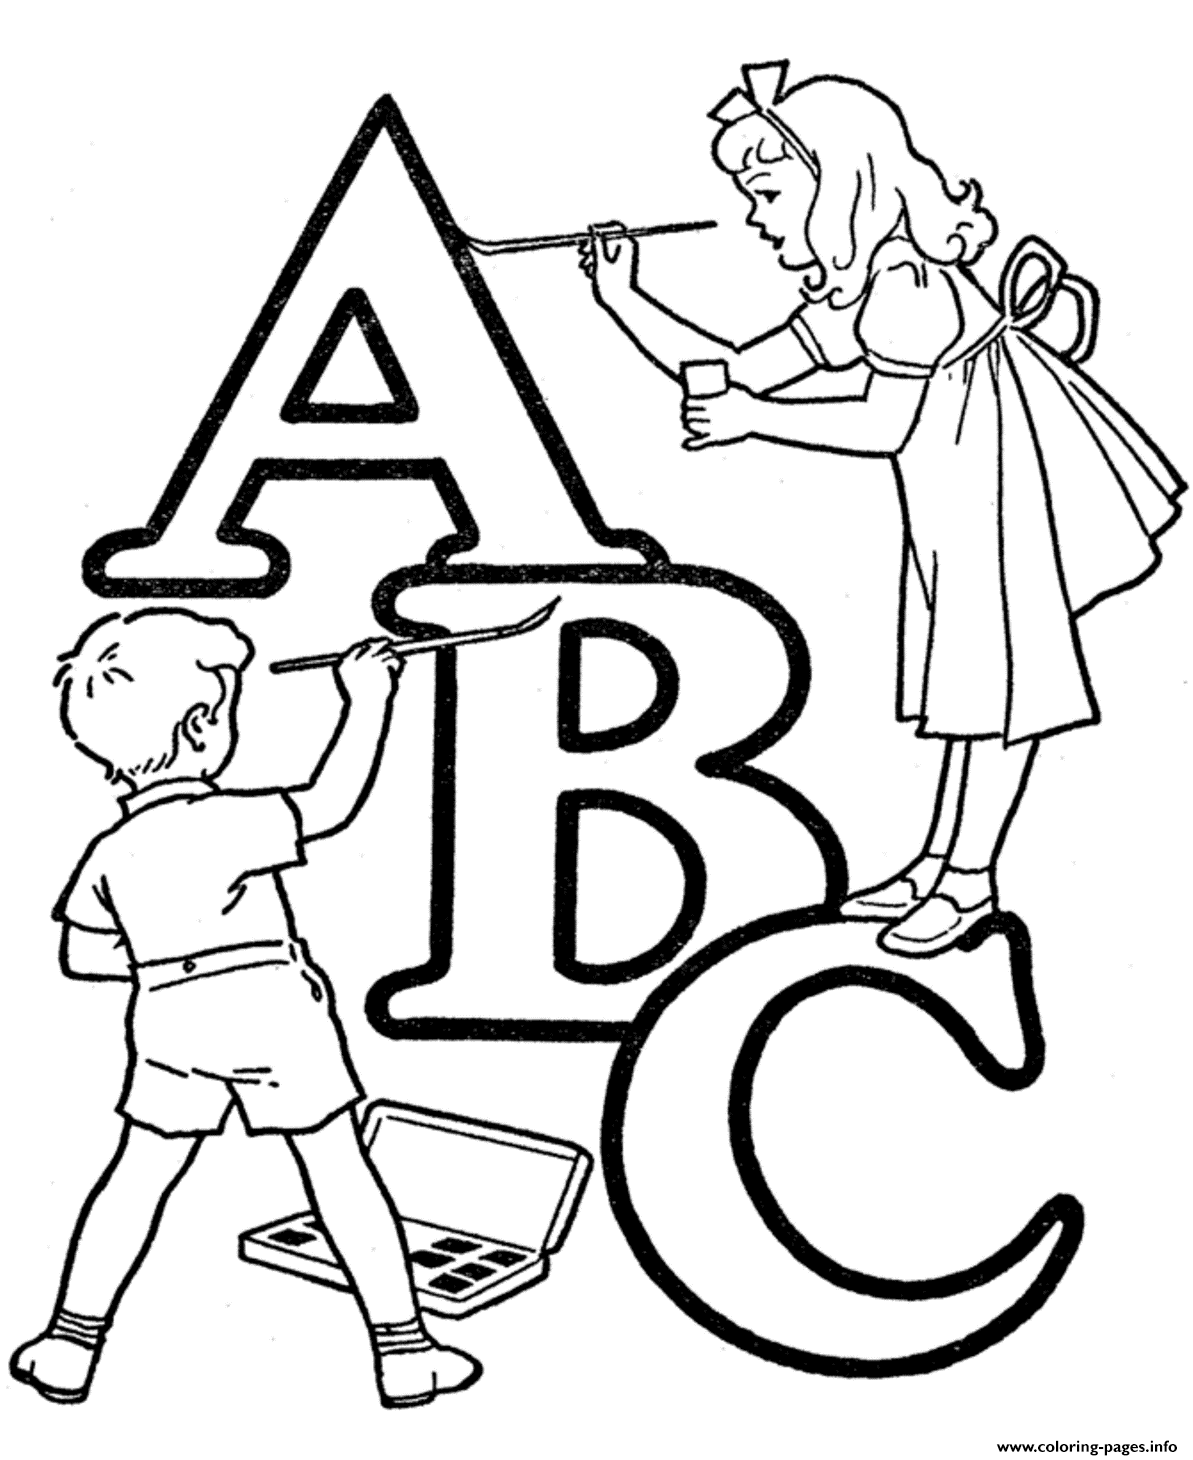 Alphabet S Printable Abc Coloring Kidsf593 coloring